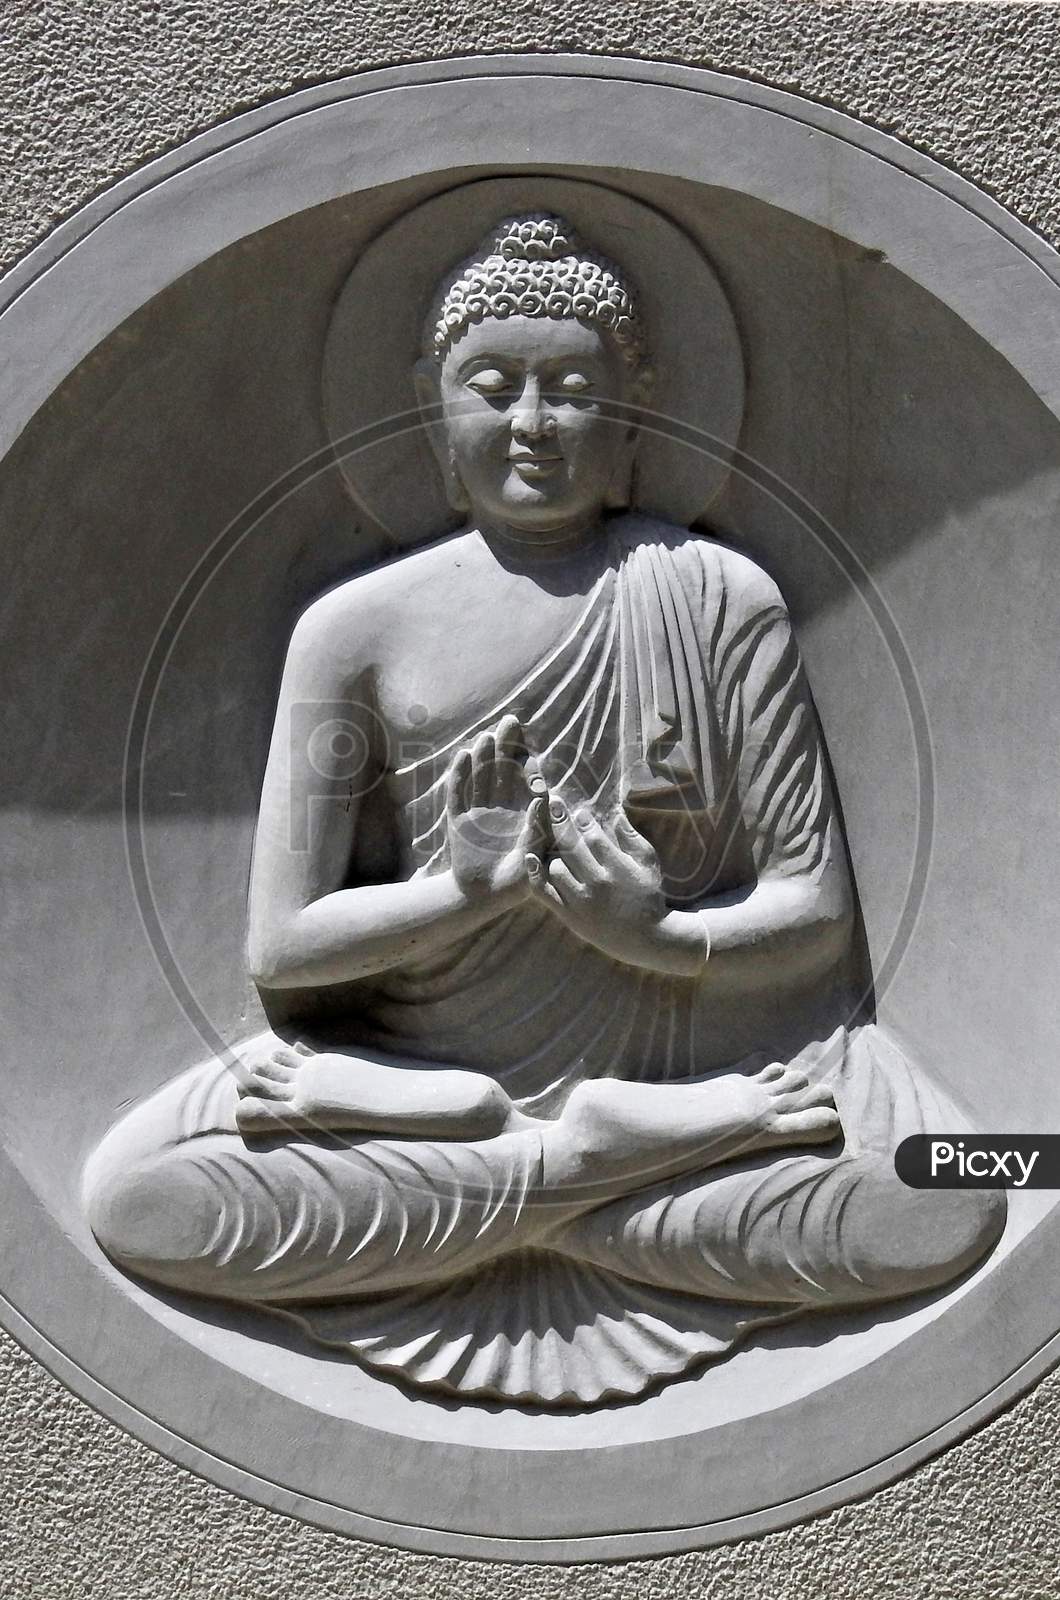 View Of Stone Carving Of God Buddha In Meditating Pose In An Indian Monastry